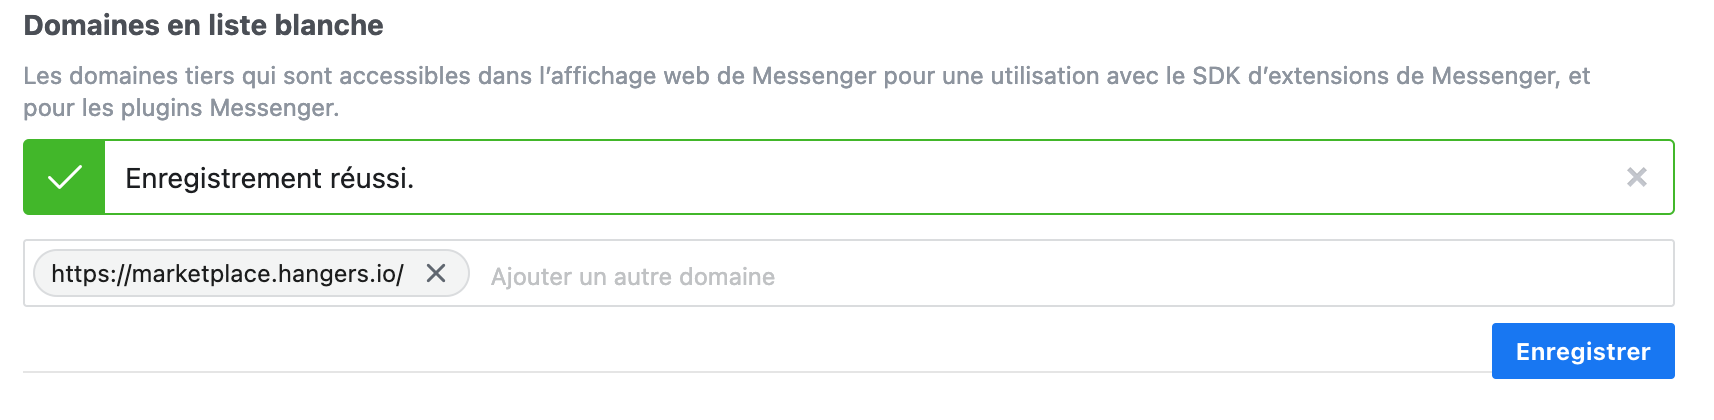 tuto-liste-blanche-messenger-step-4.png